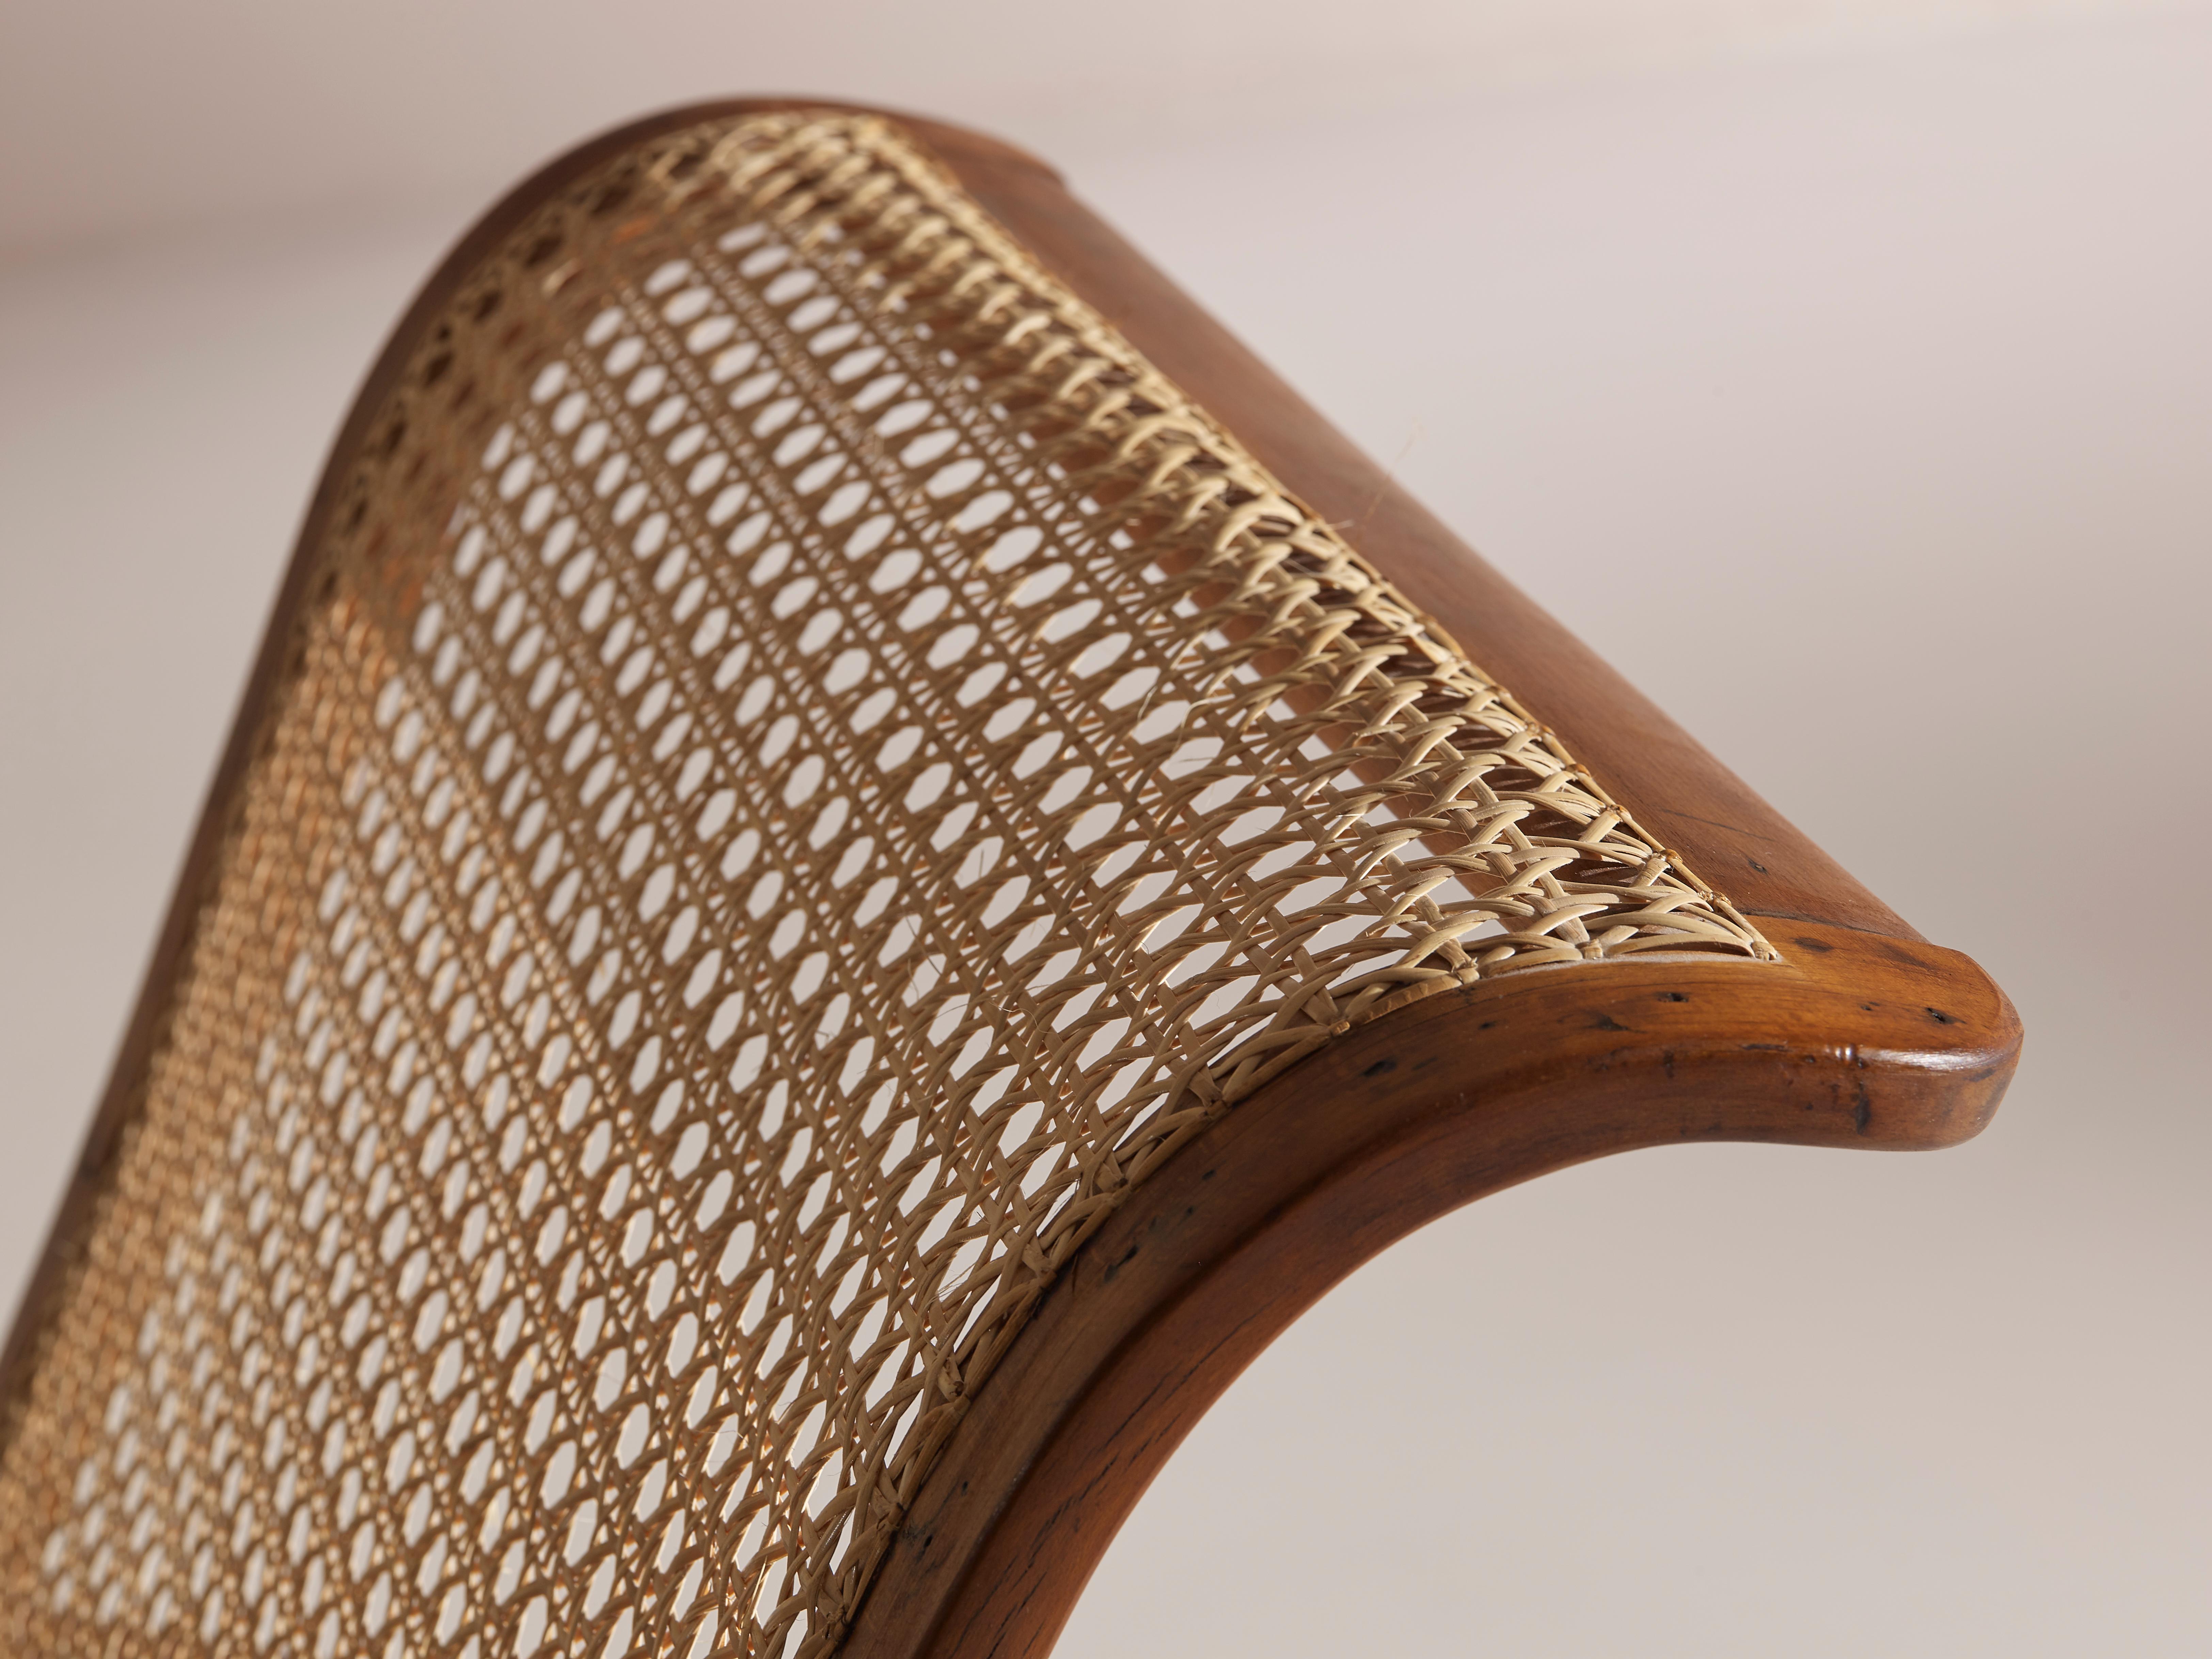 Caned Rocking Chair Made by Porino, Italy, 1930s 2